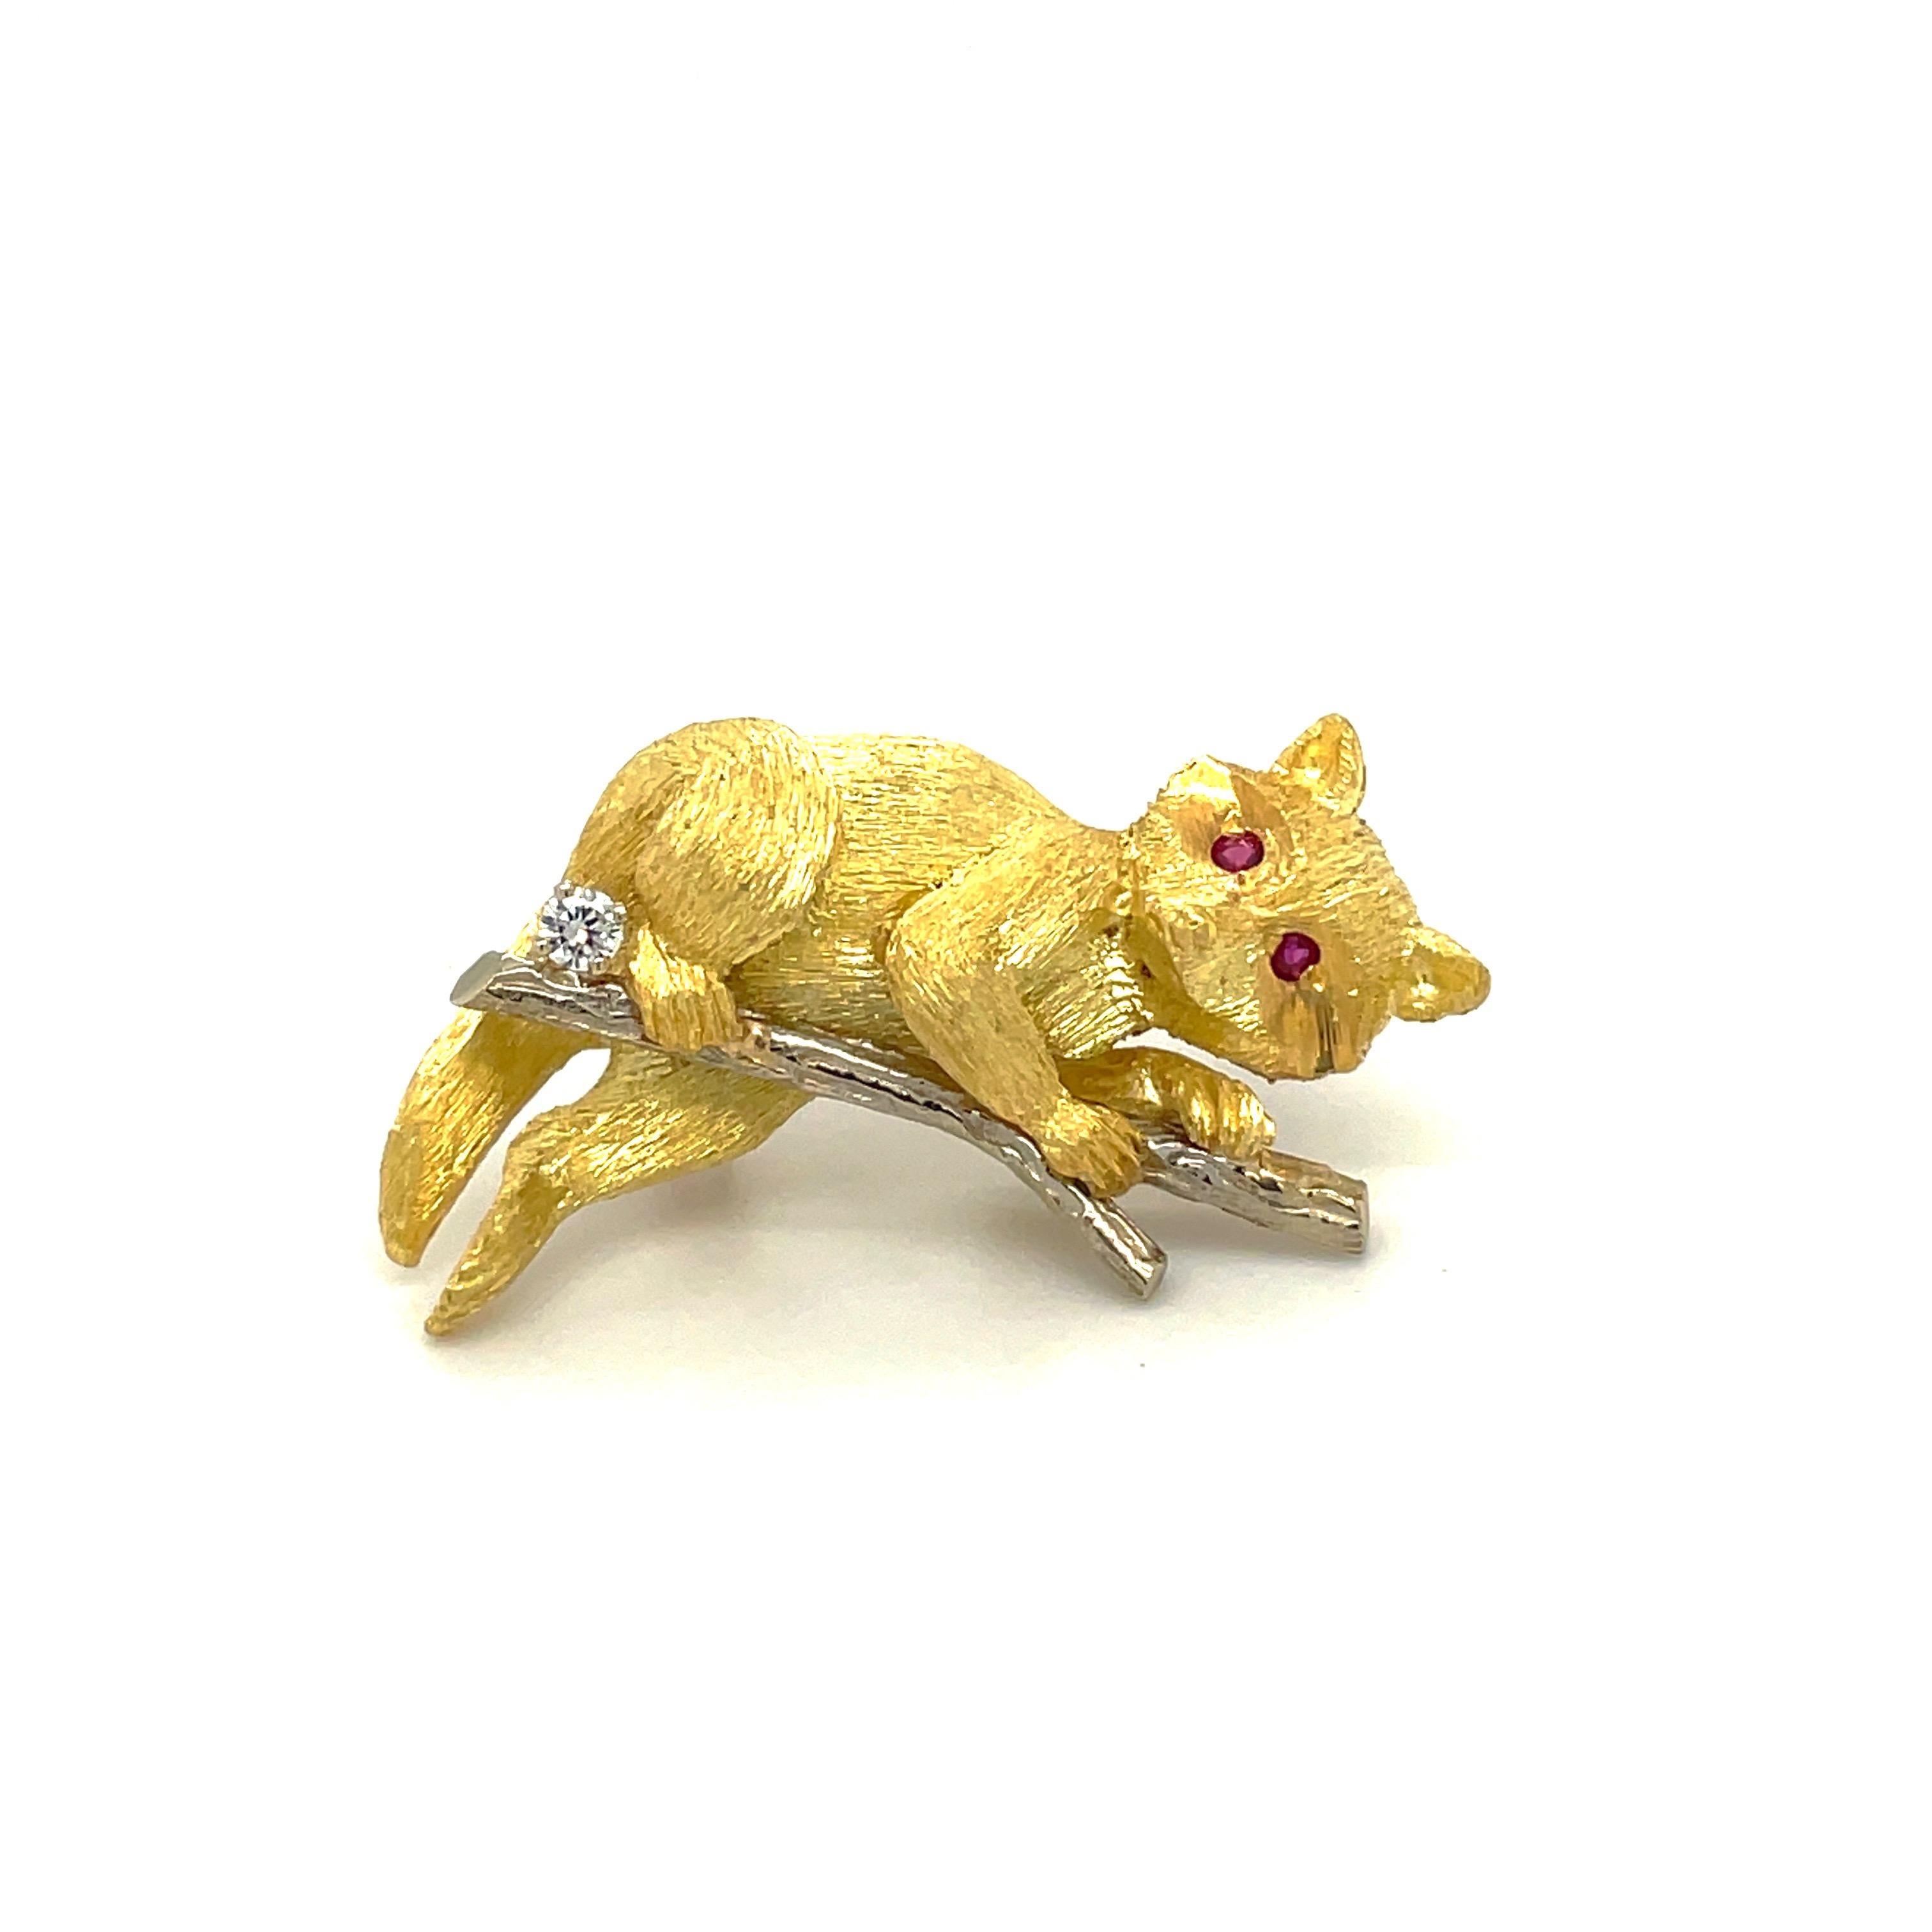 This charming 18KT gold raccoon brooch is brought to life with a variety of textures and precious stone accents. 